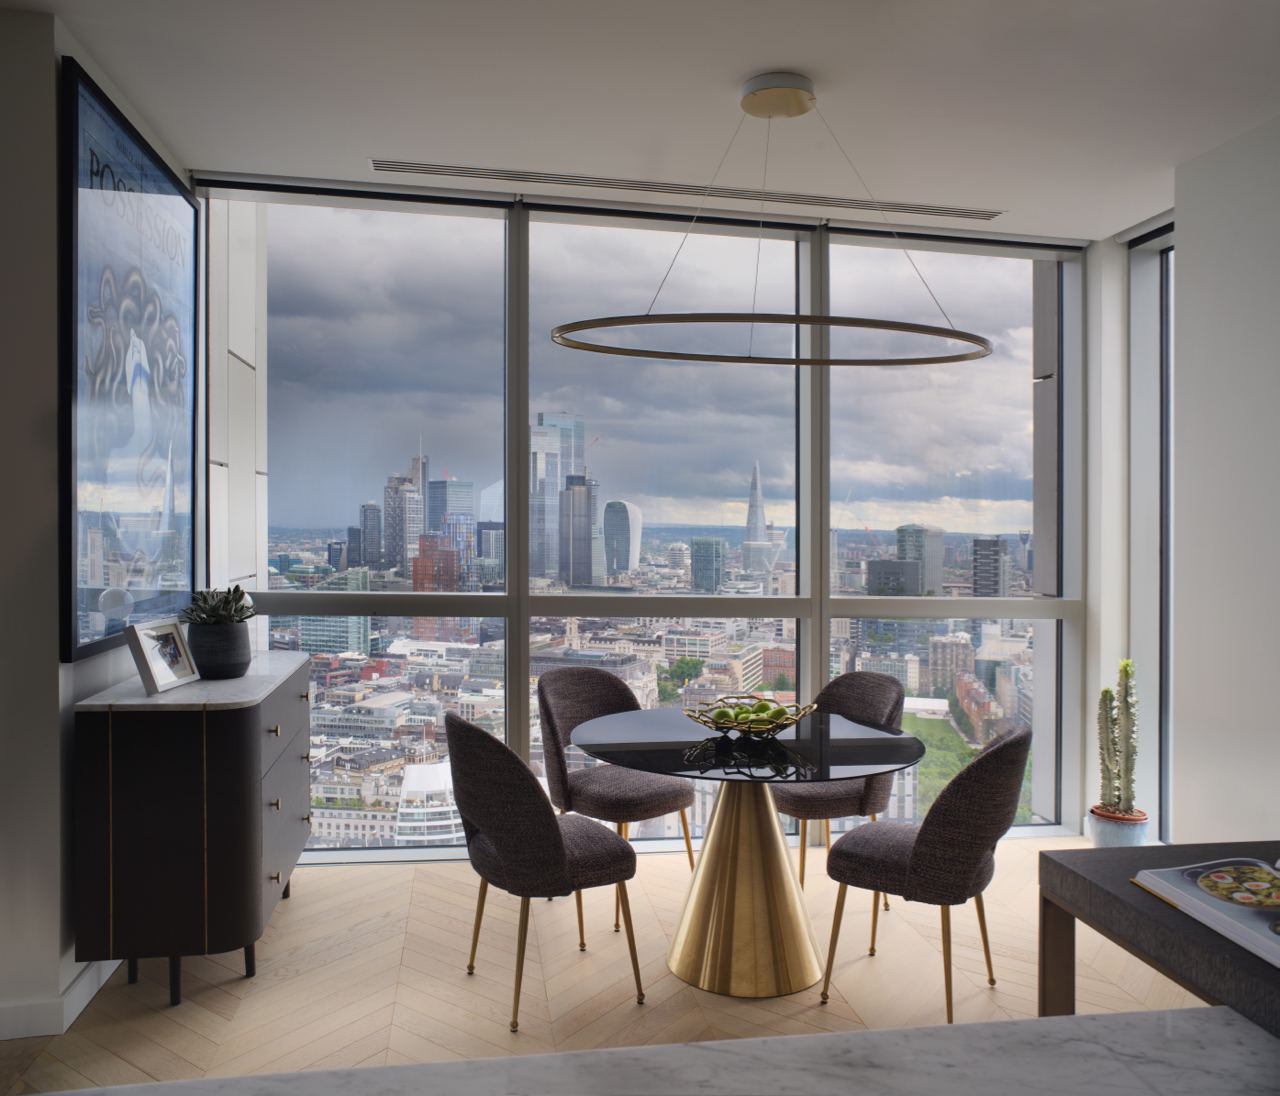 Dining area with a view